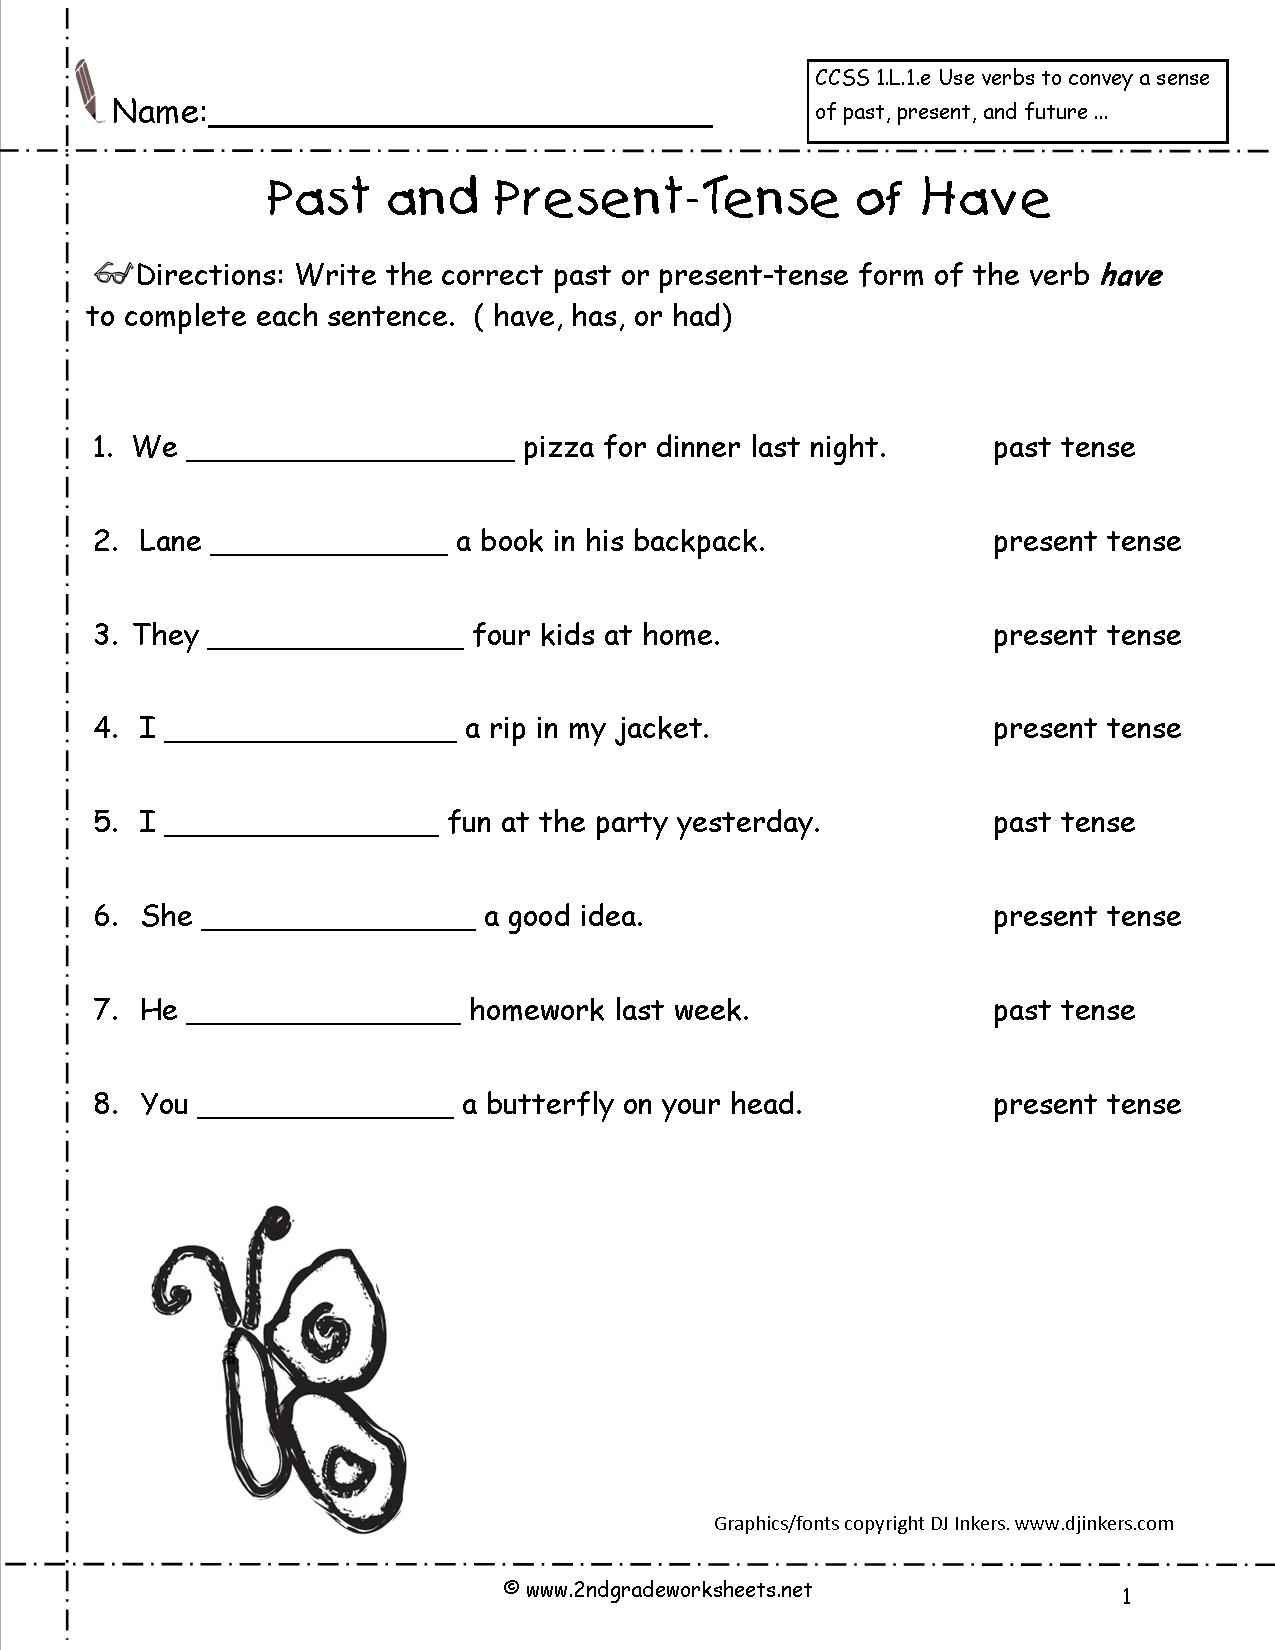 Present And Past Tense Verbs Worksheets For Grade 2